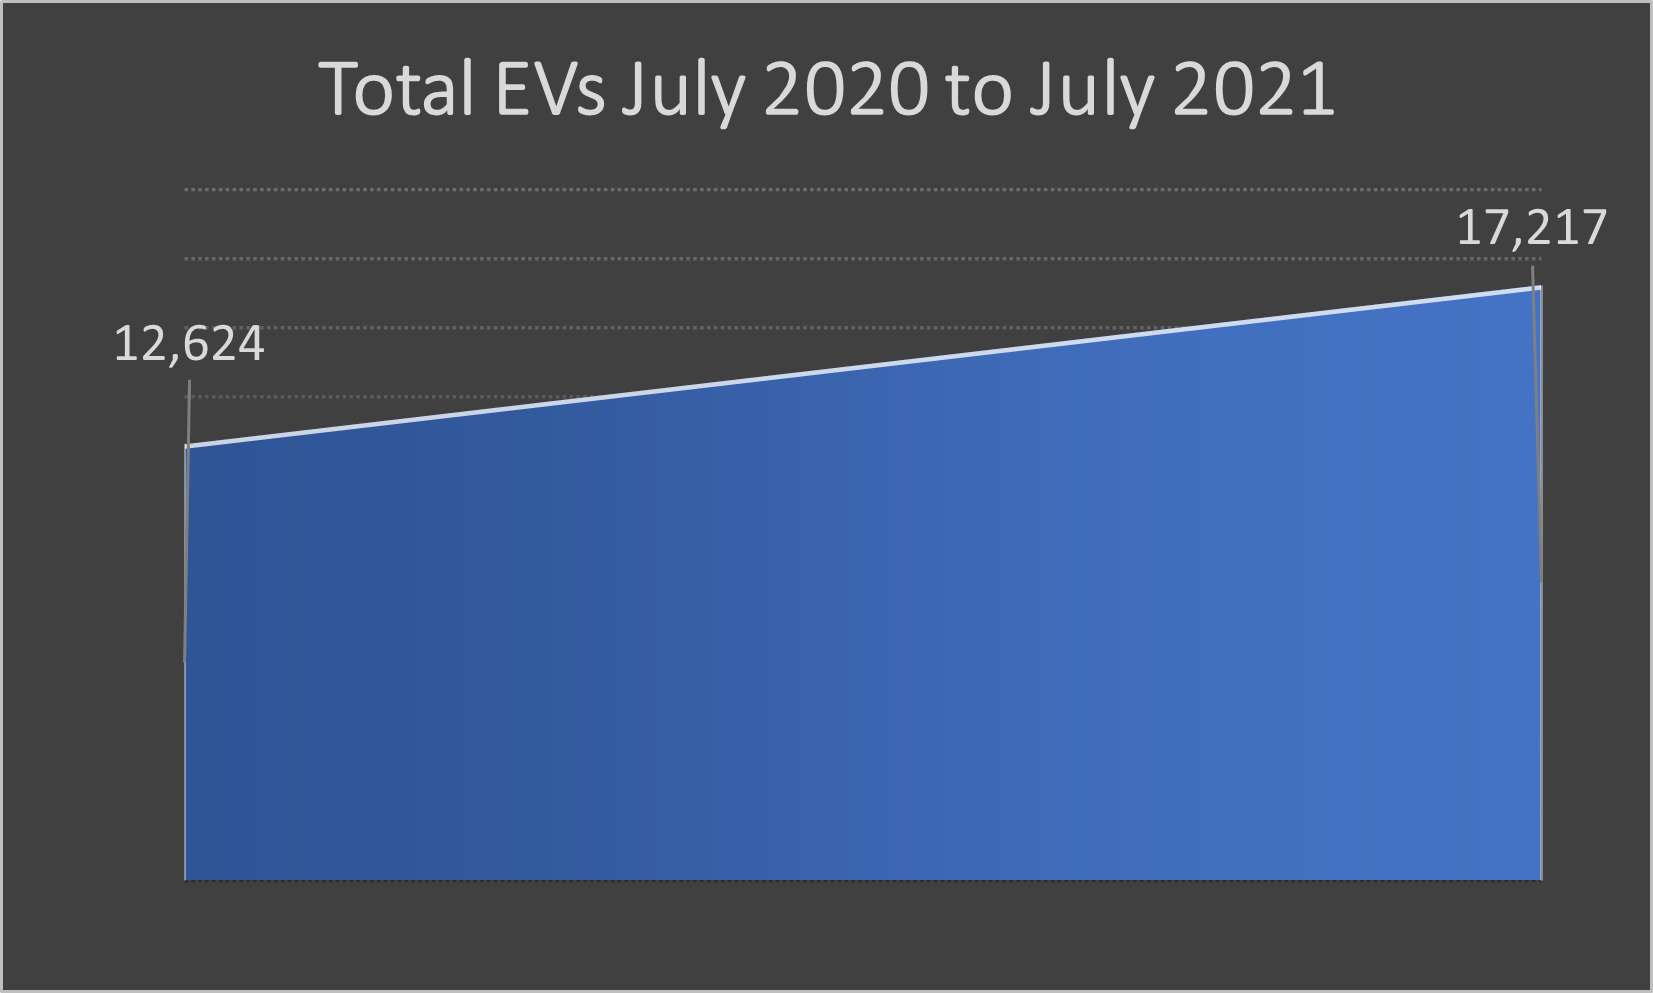 year over year growth in registered EVs